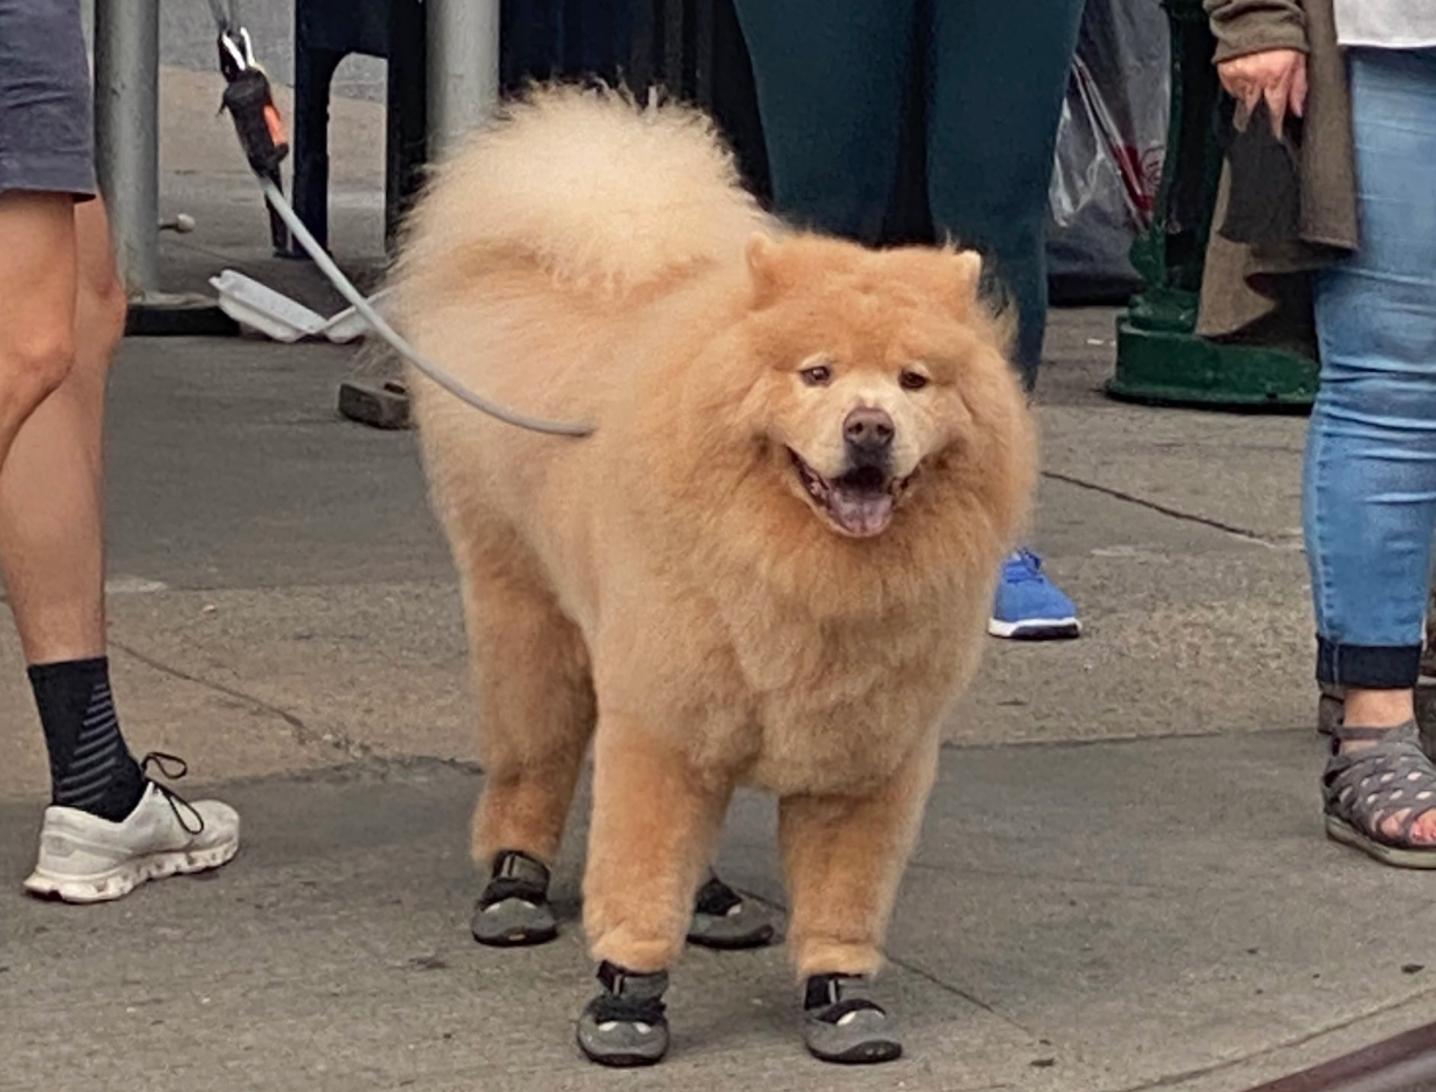 A photo of a dog in SHOES